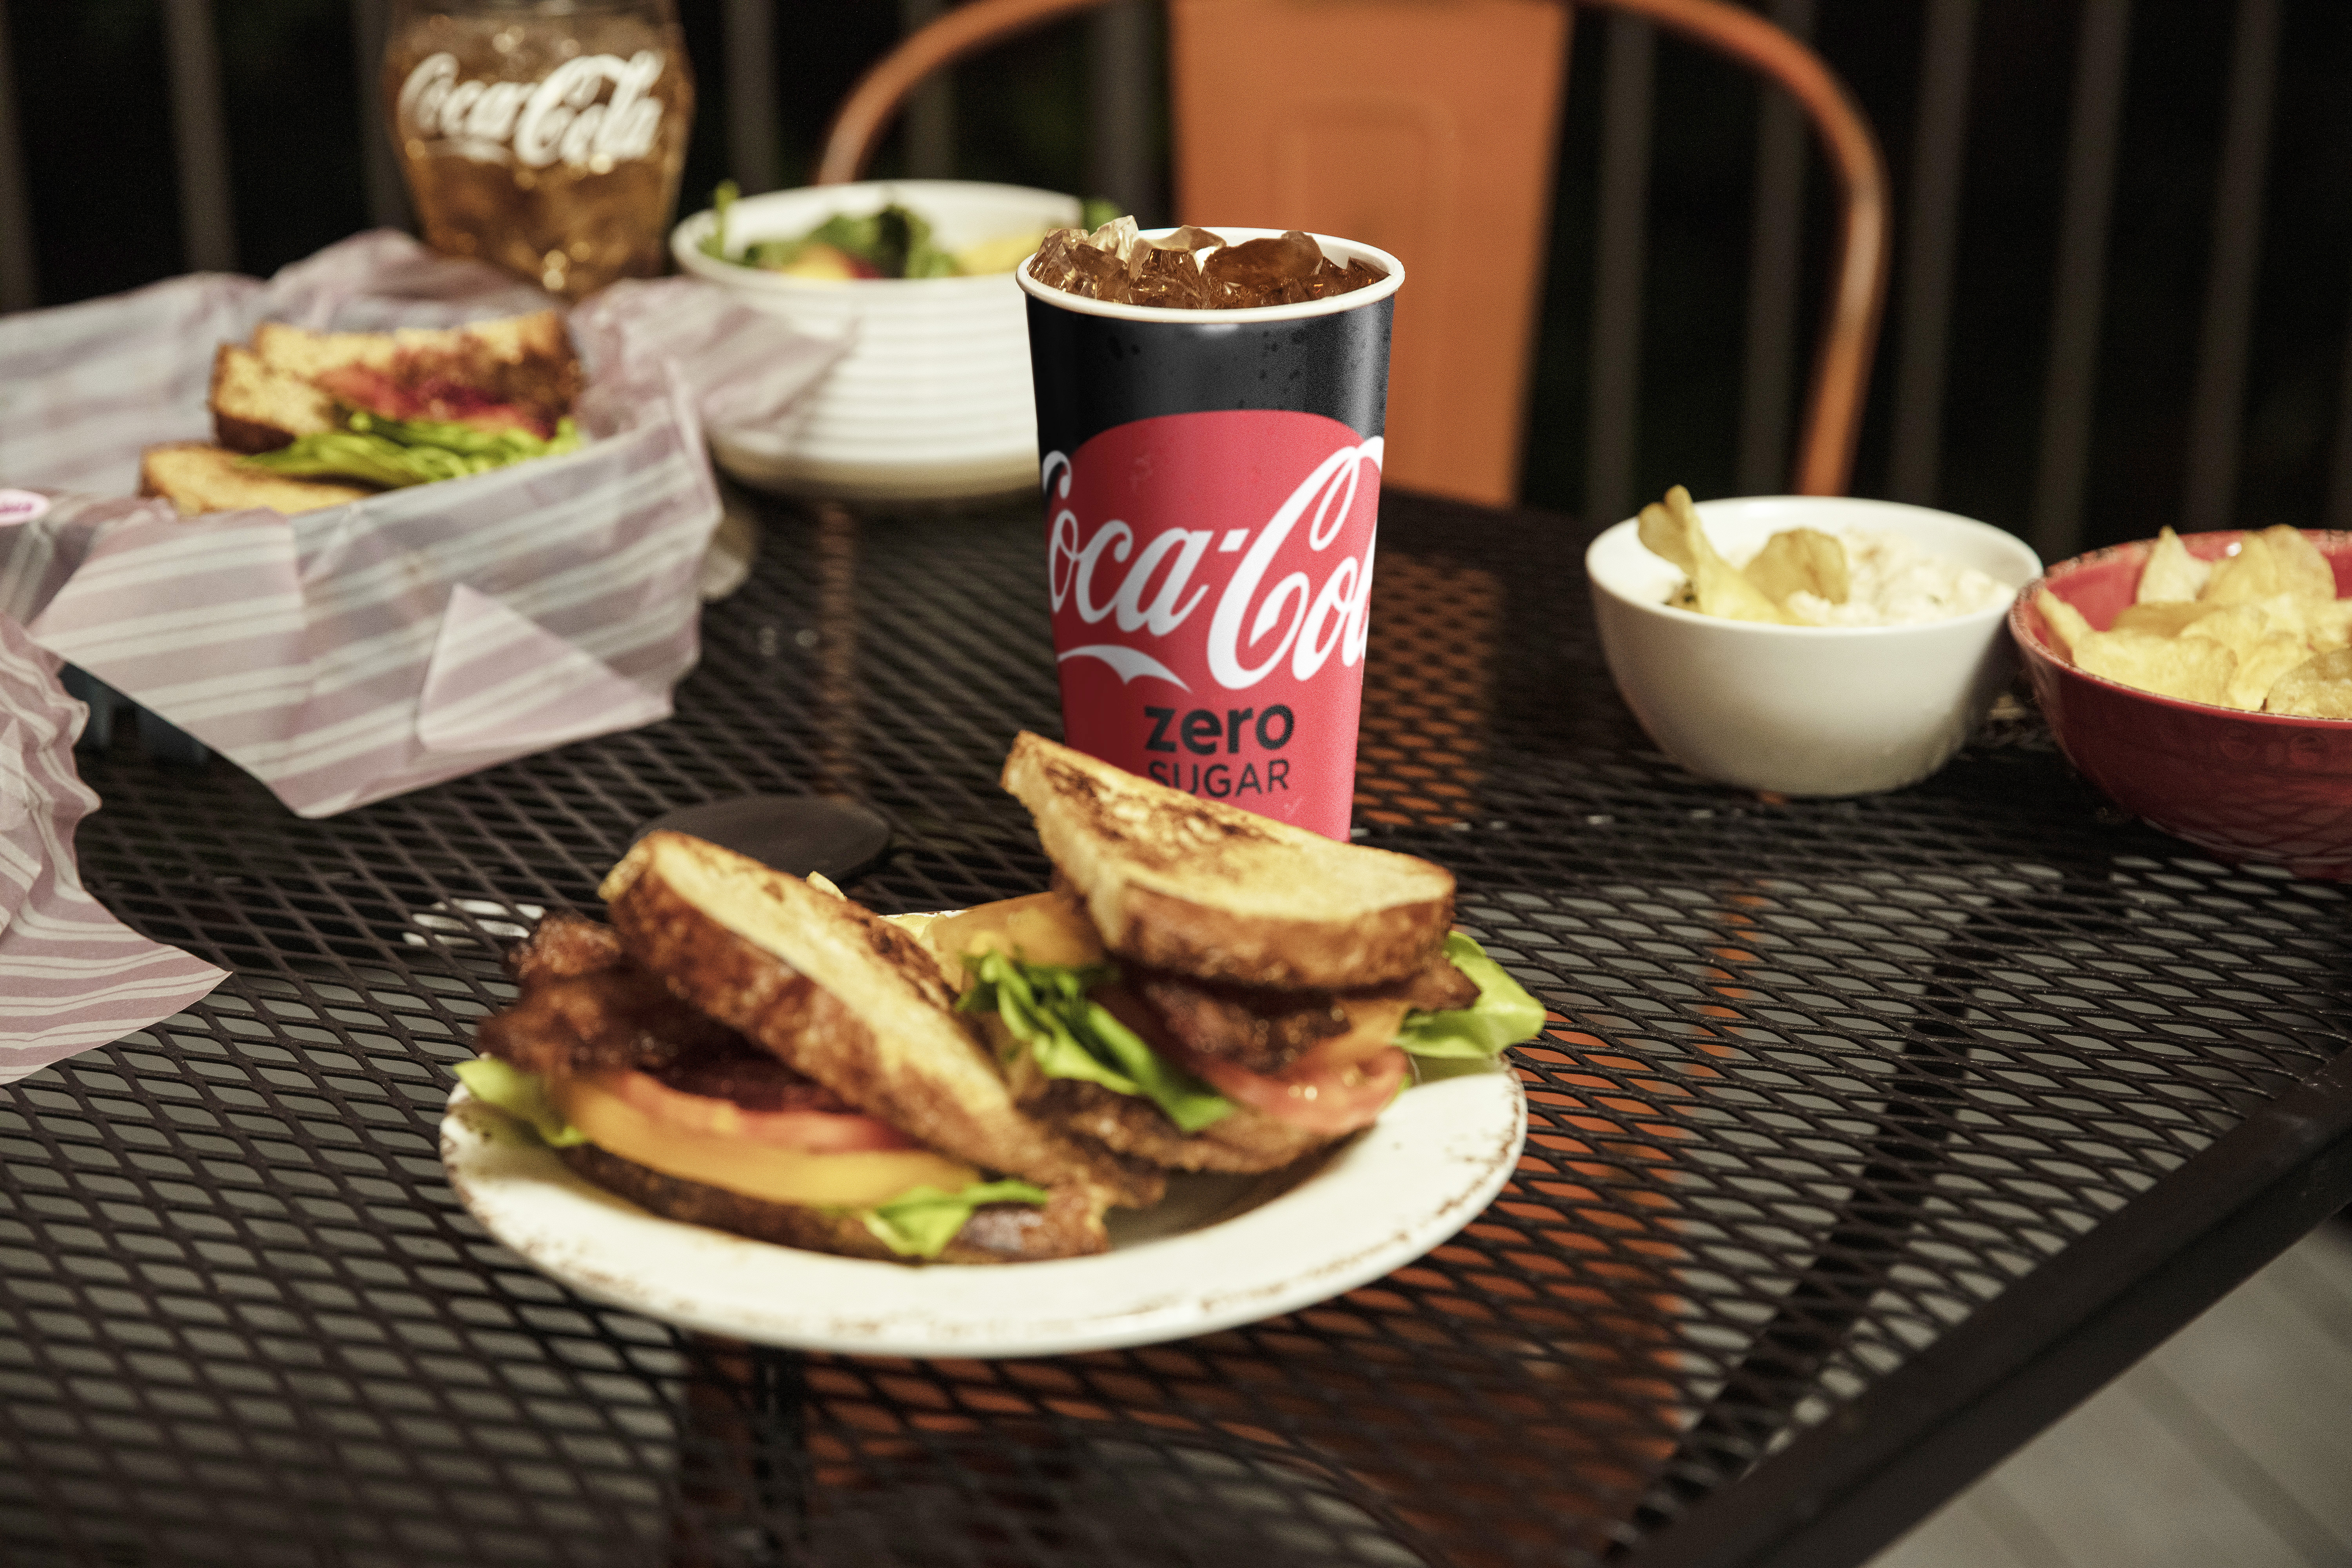 A dinner table topped with sandwiches, chips, and glasses of Coca-Cola soda.